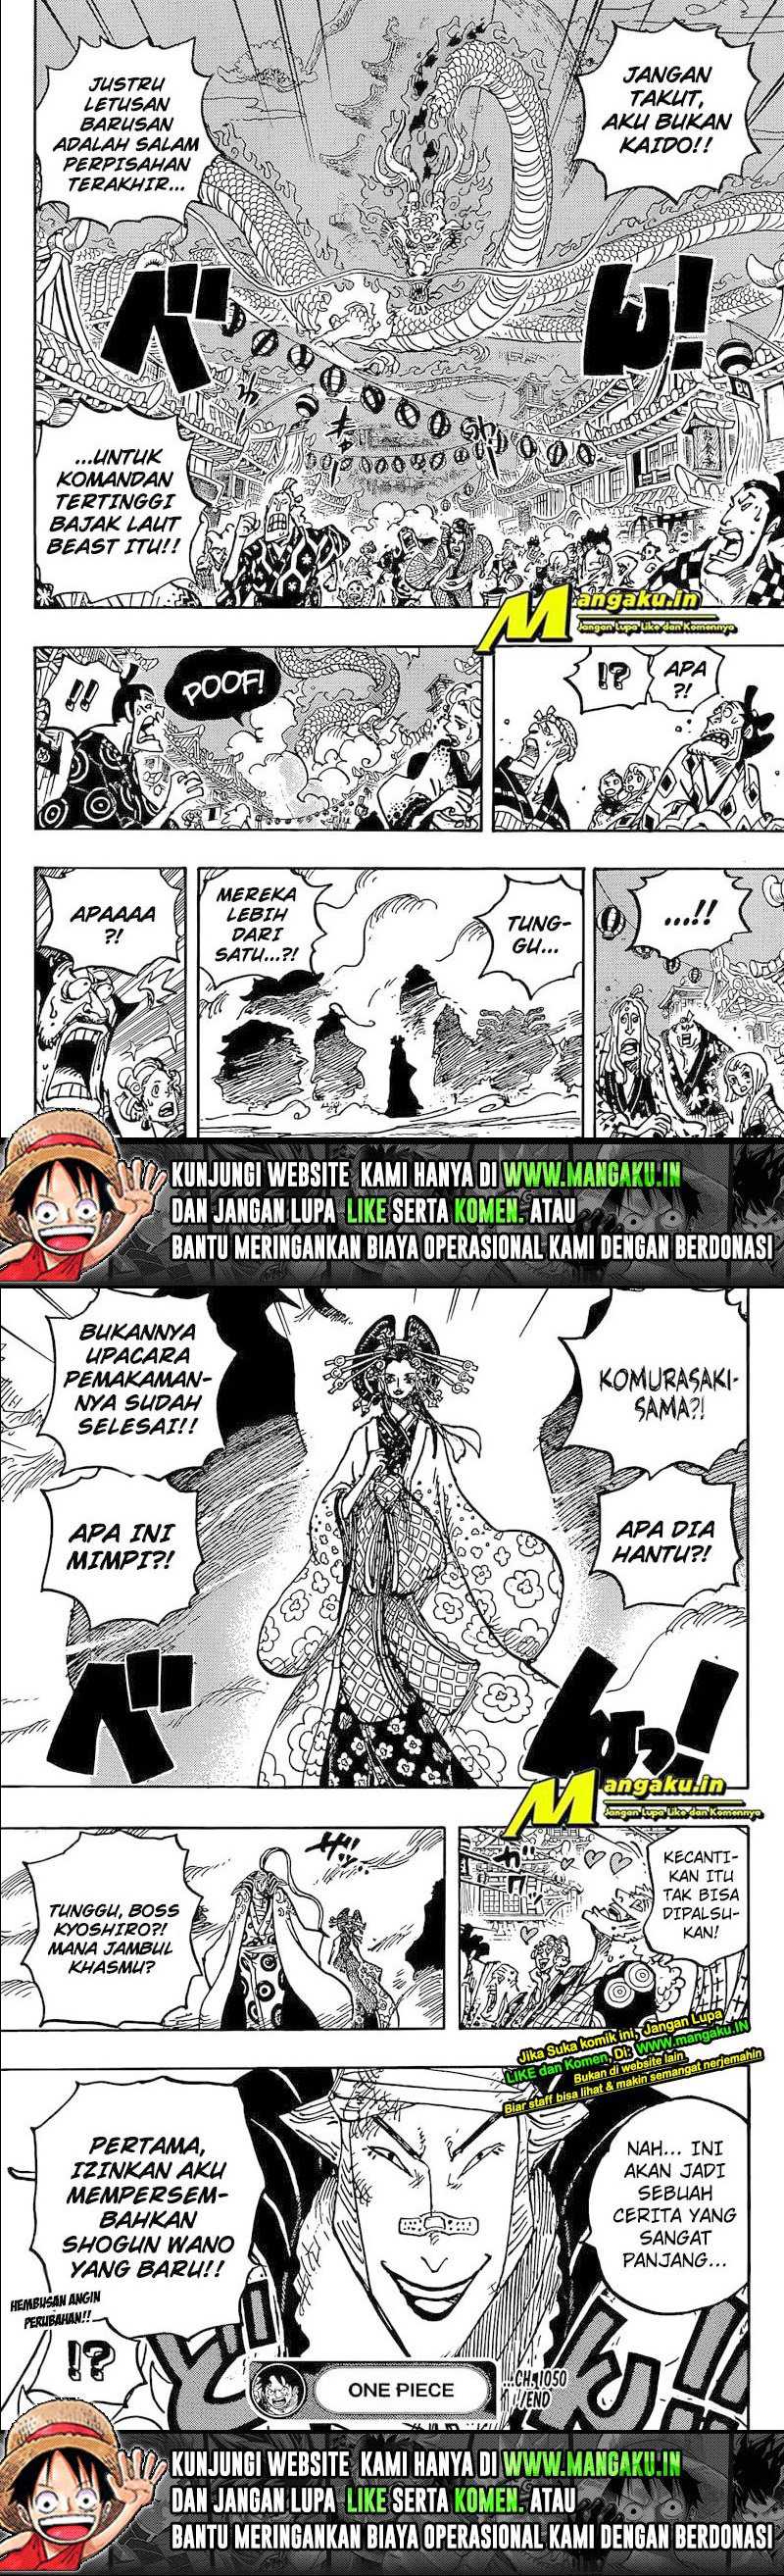 One Piece Chapter 1050 Hq - 39